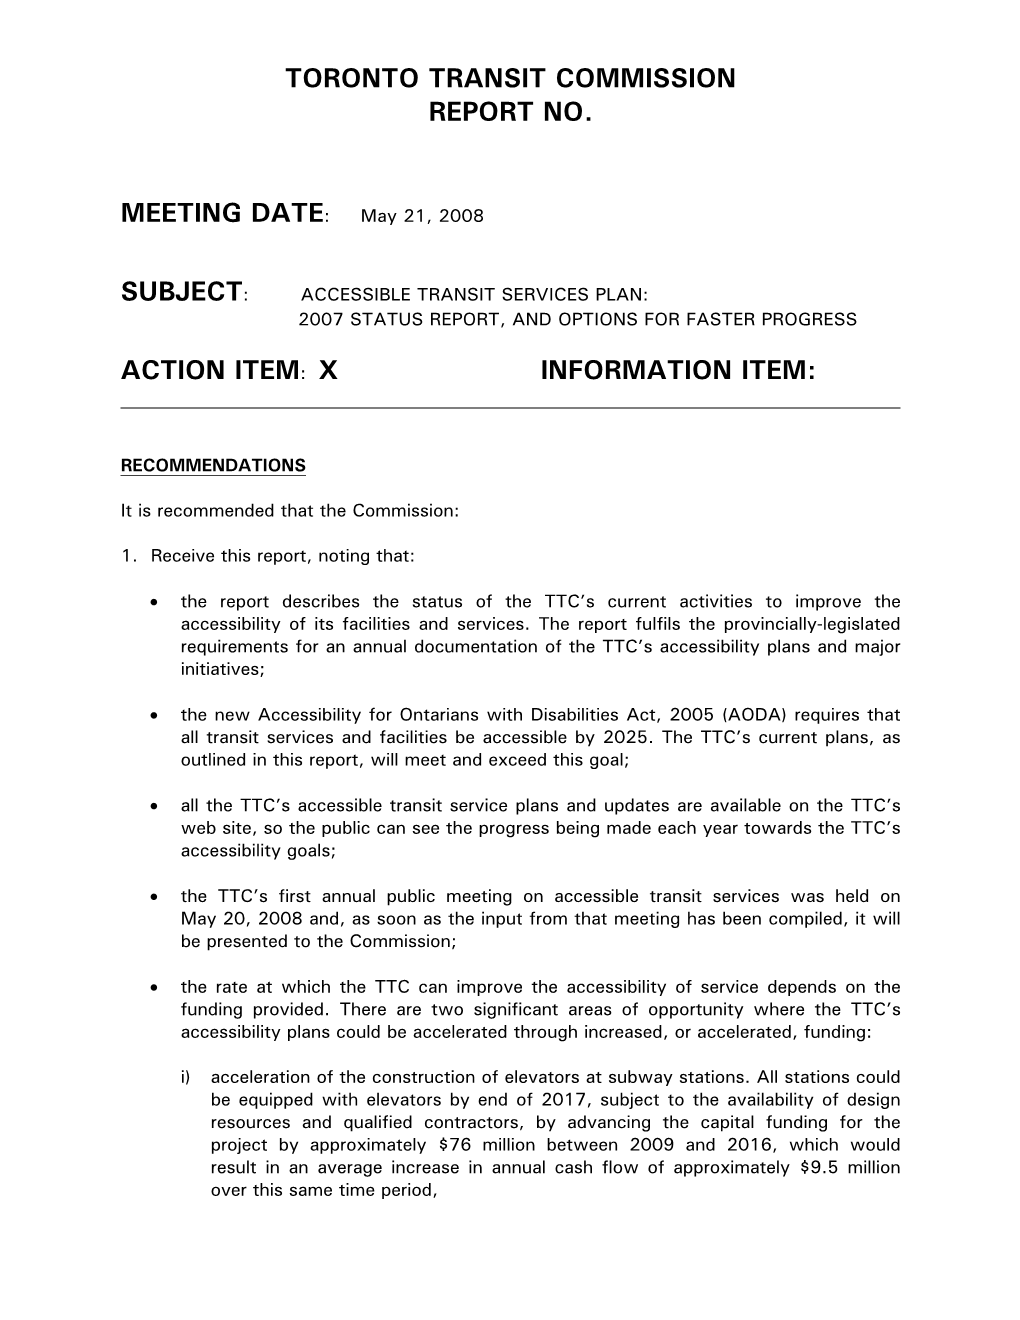 Toronto Transit Commission Report No. Meeting Date